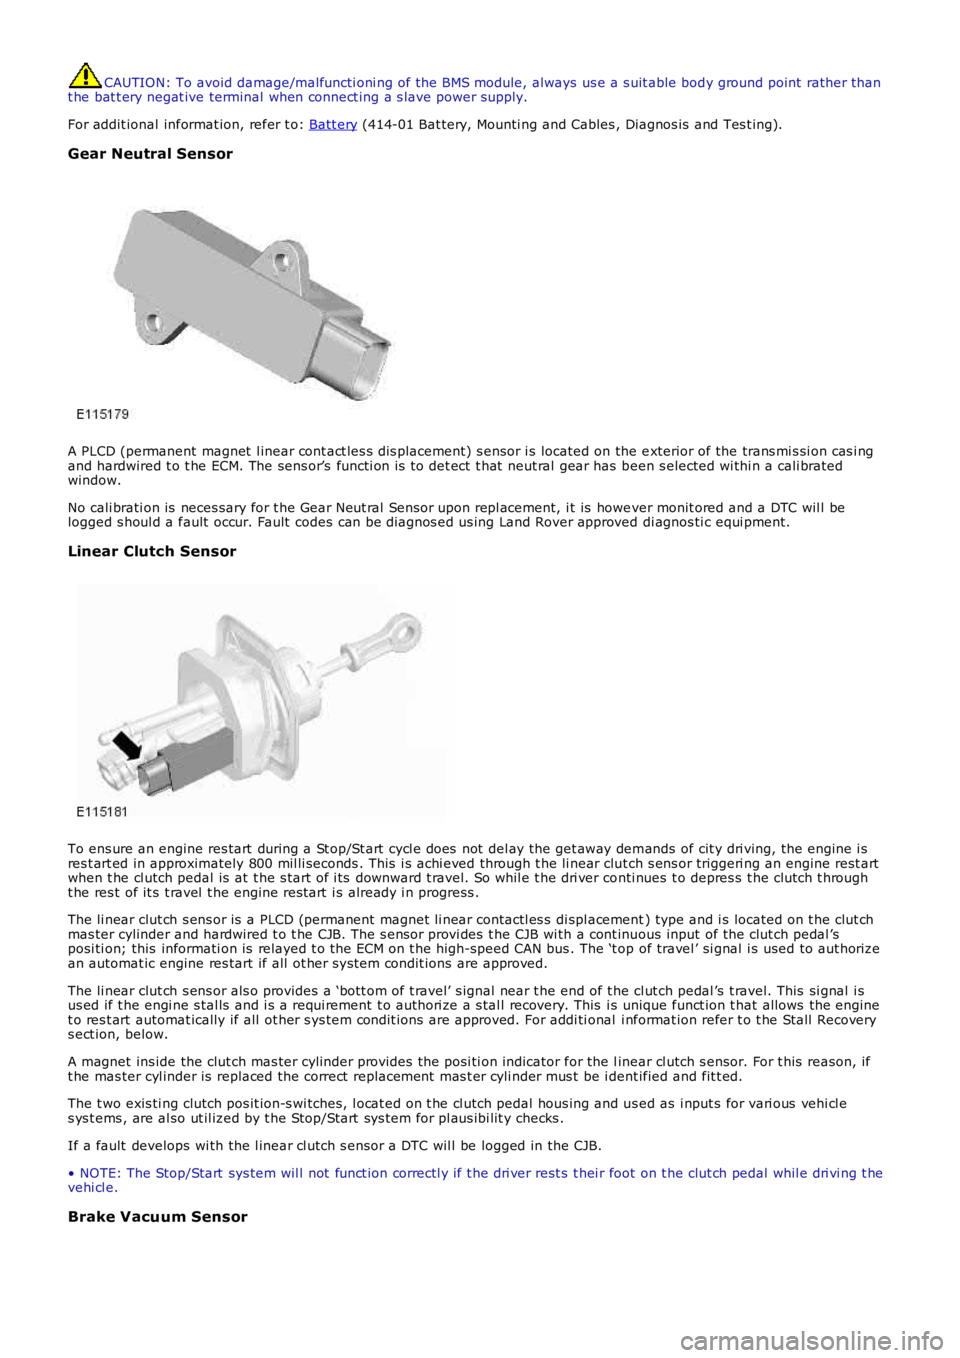 LAND ROVER FRELANDER 2 2006  Repair Manual CAUTION: To avoid damage/malfuncti oni ng of the BMS module, always  us e a s uit able body ground point  rather thant he bat t ery negat ive terminal when connect ing a s lave power supply.
For addit